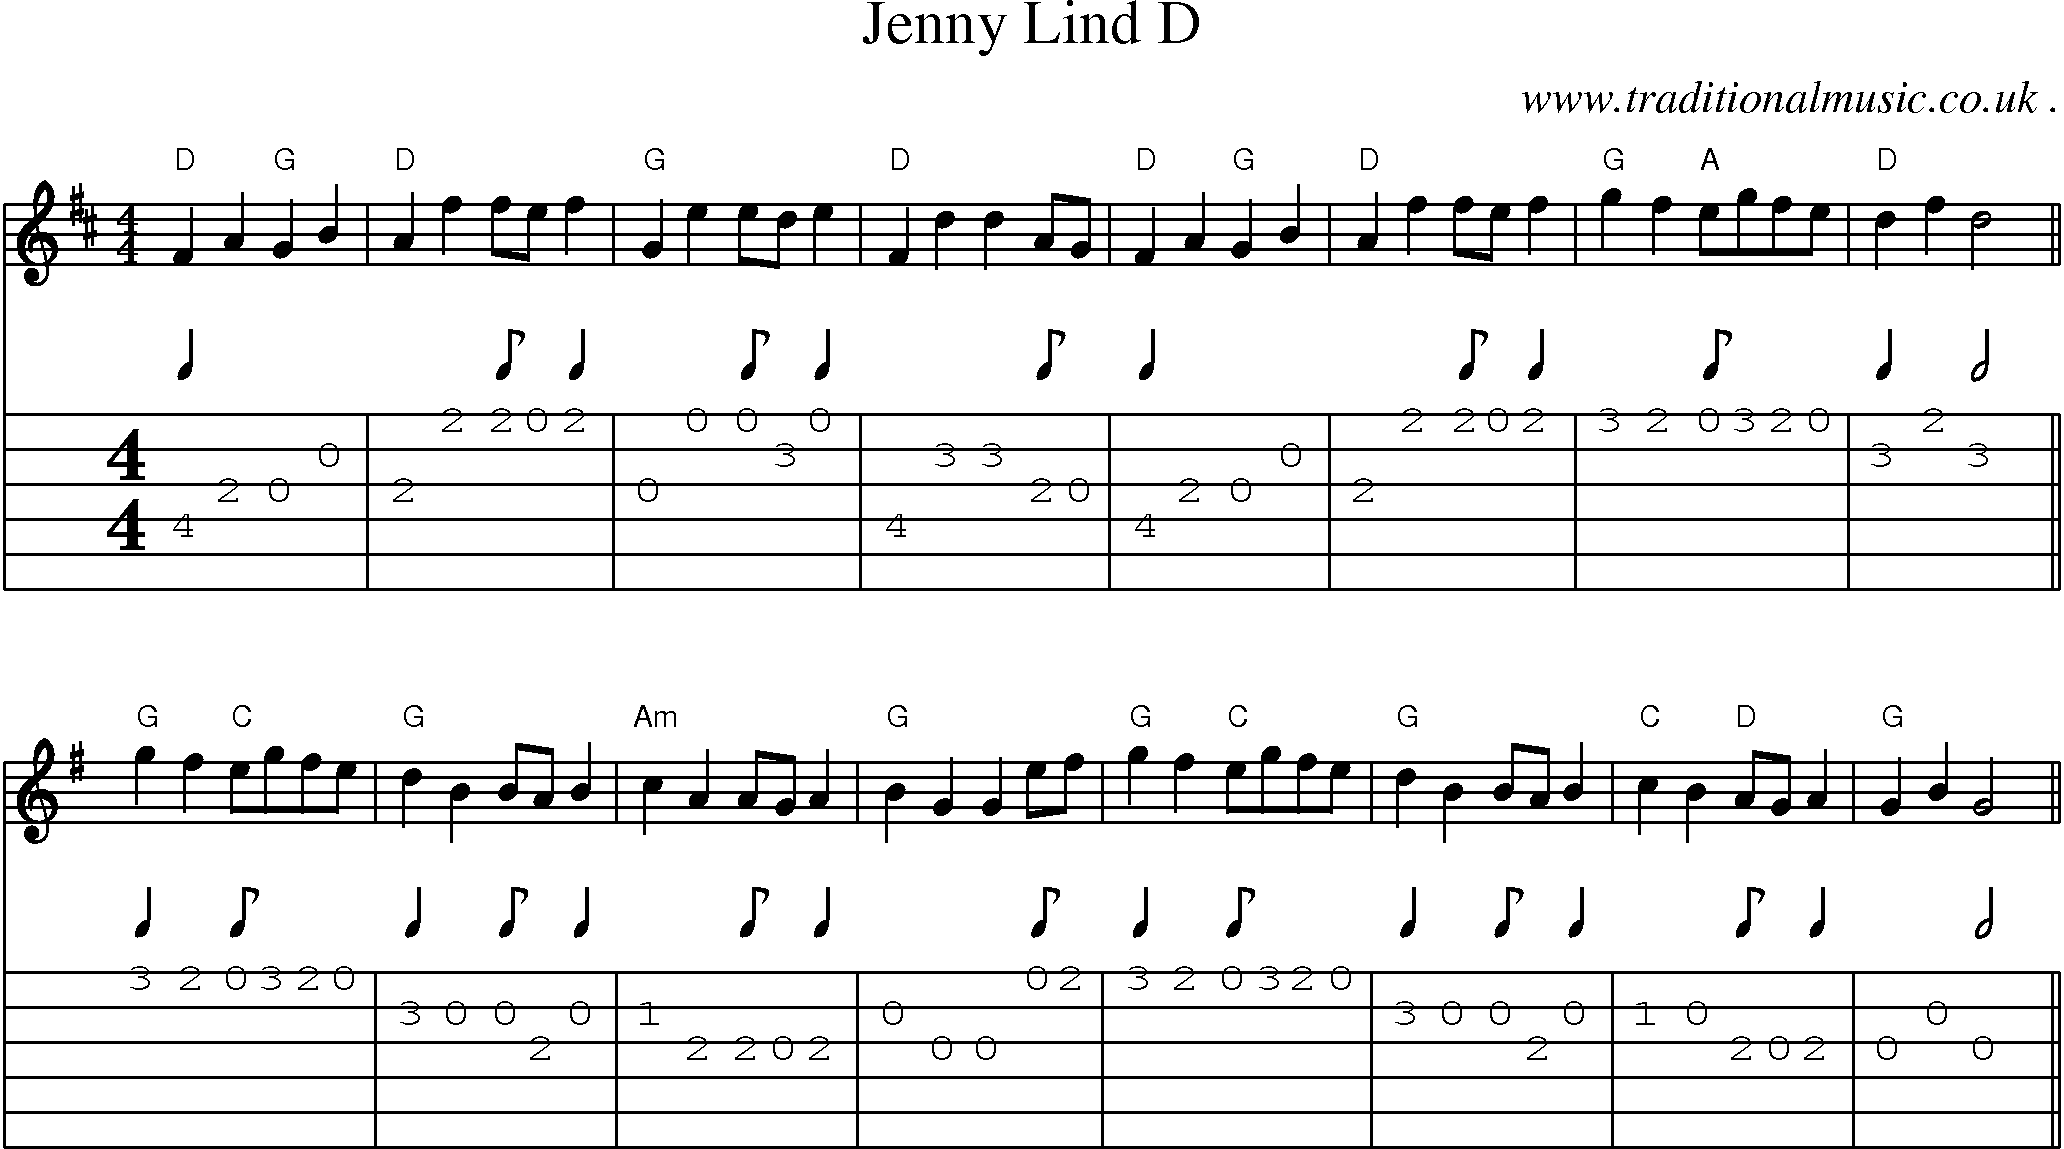 Music Score and Guitar Tabs for Jenny Lind D